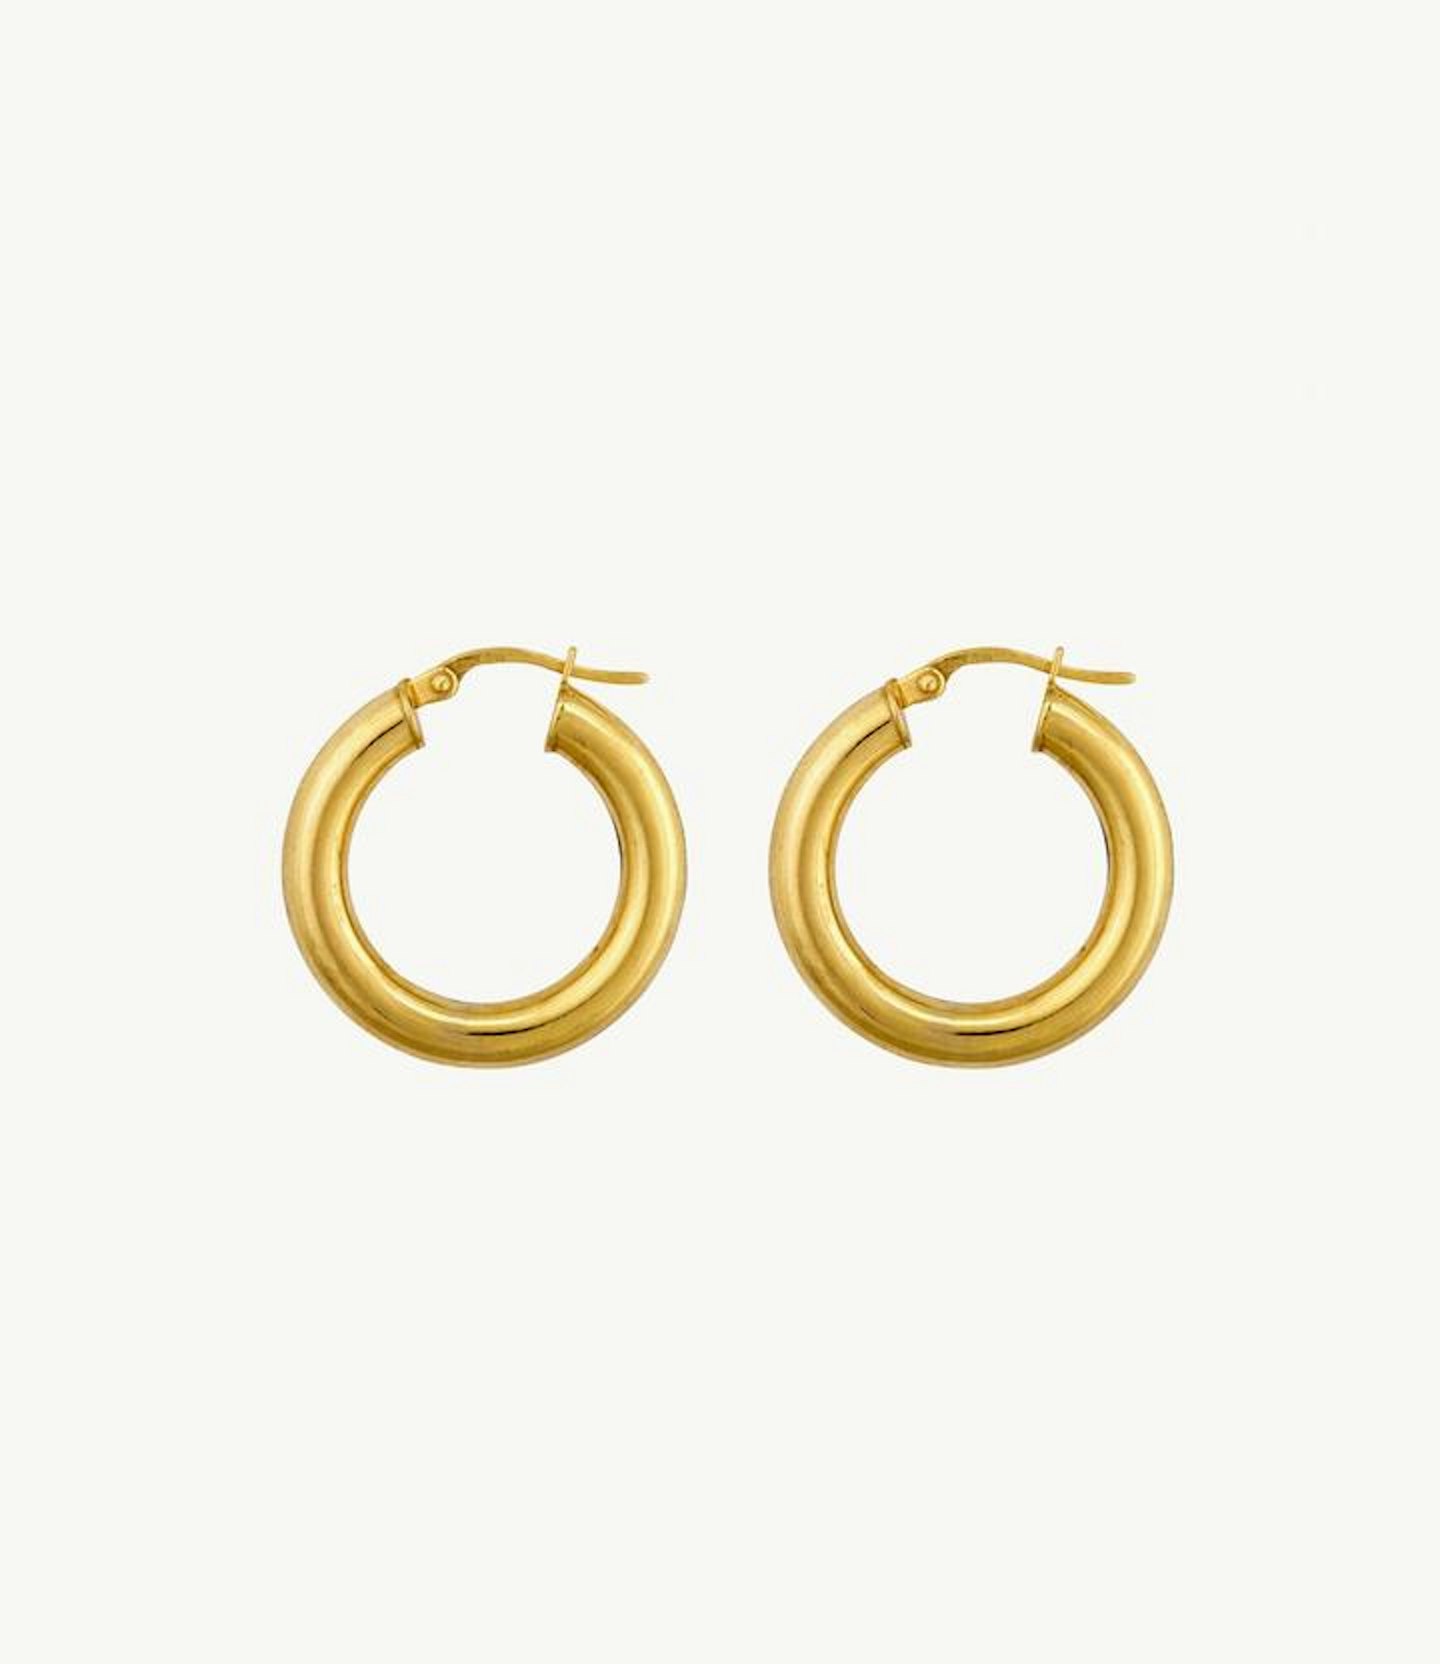 Roxanne First, The Chloe, Everyday Gold Hoops, £215